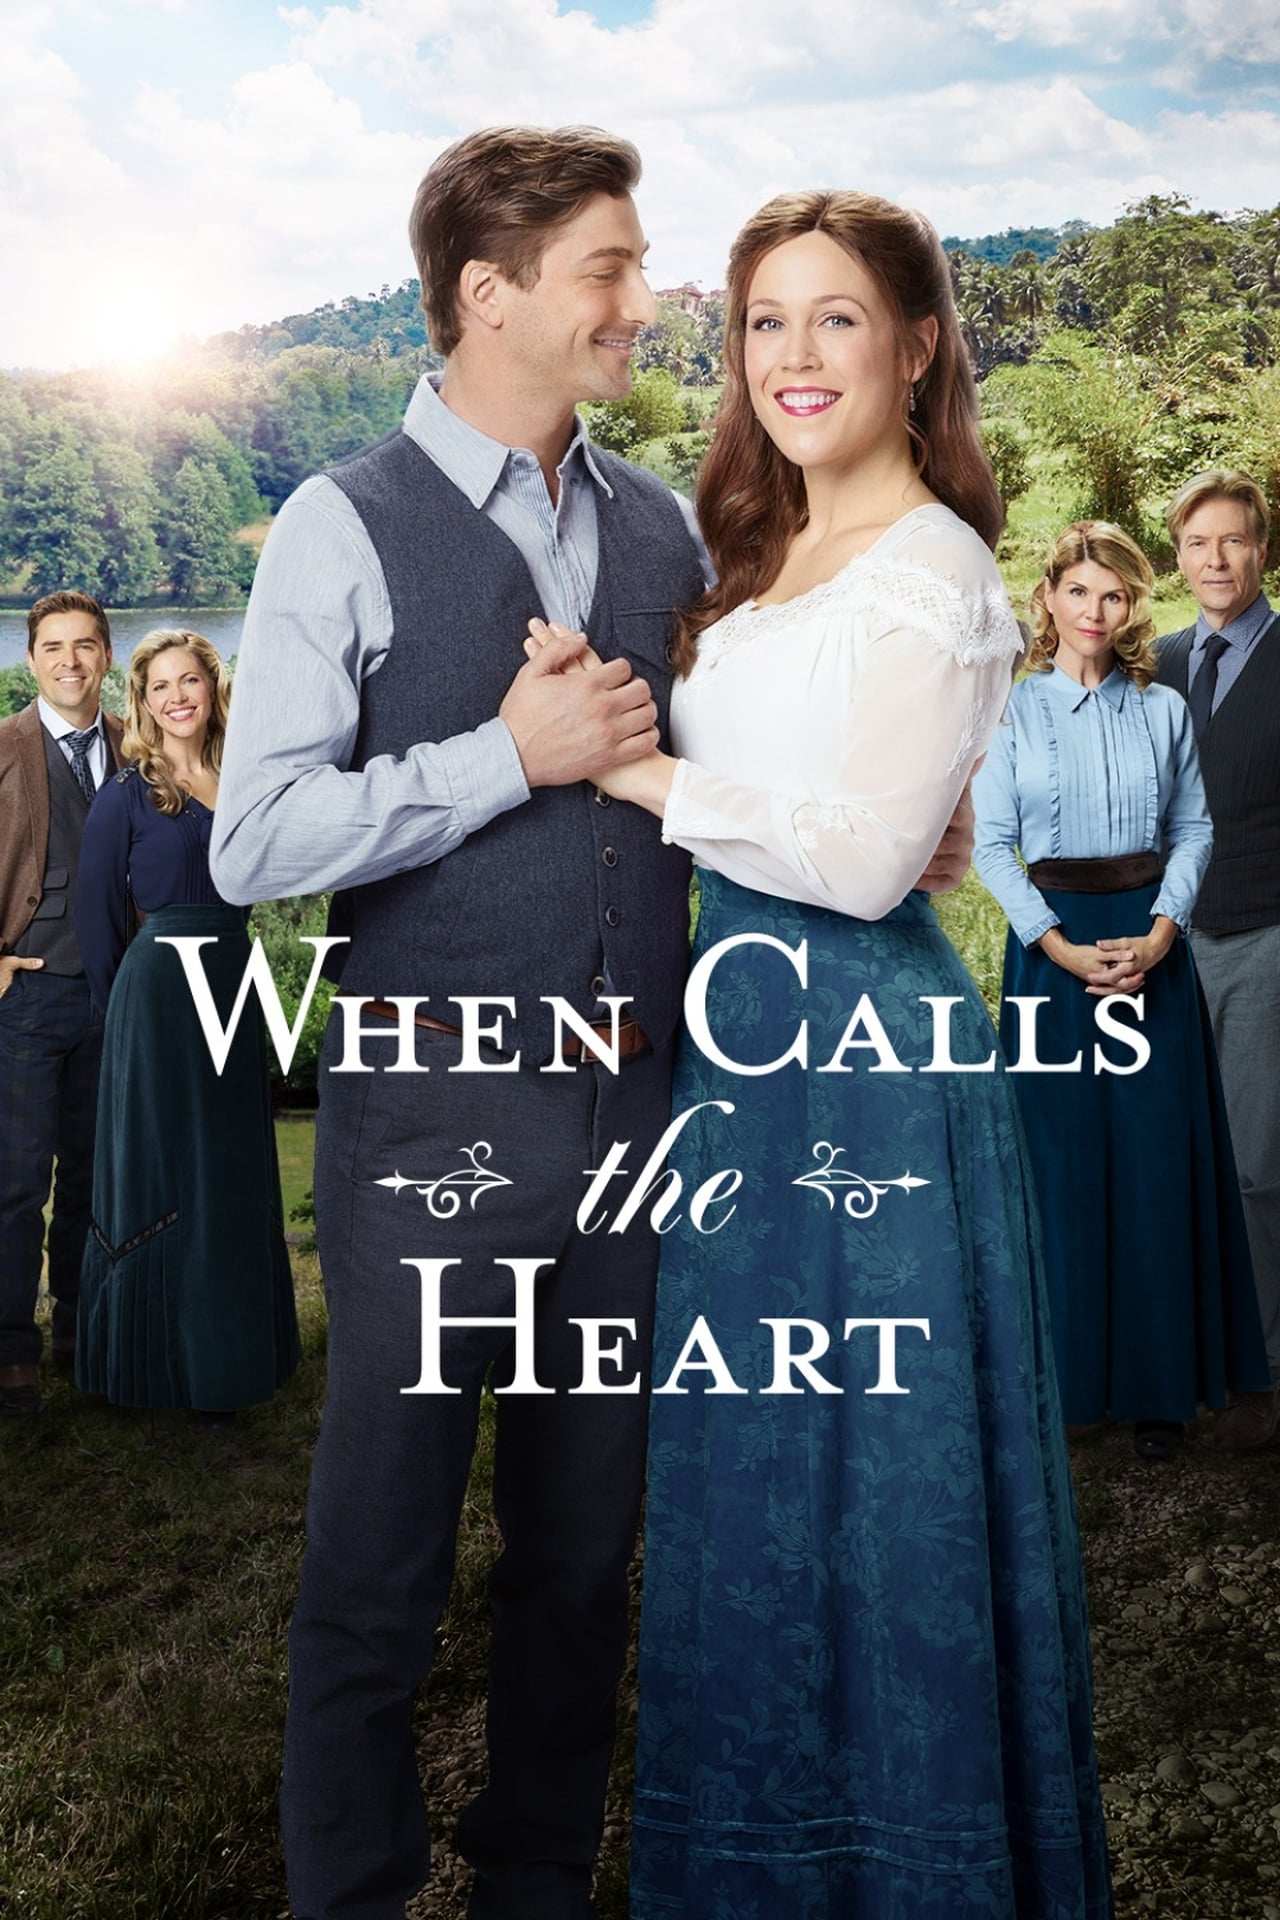 When Calls the Heart, Season 5 release date, trailers, cast, synopsis